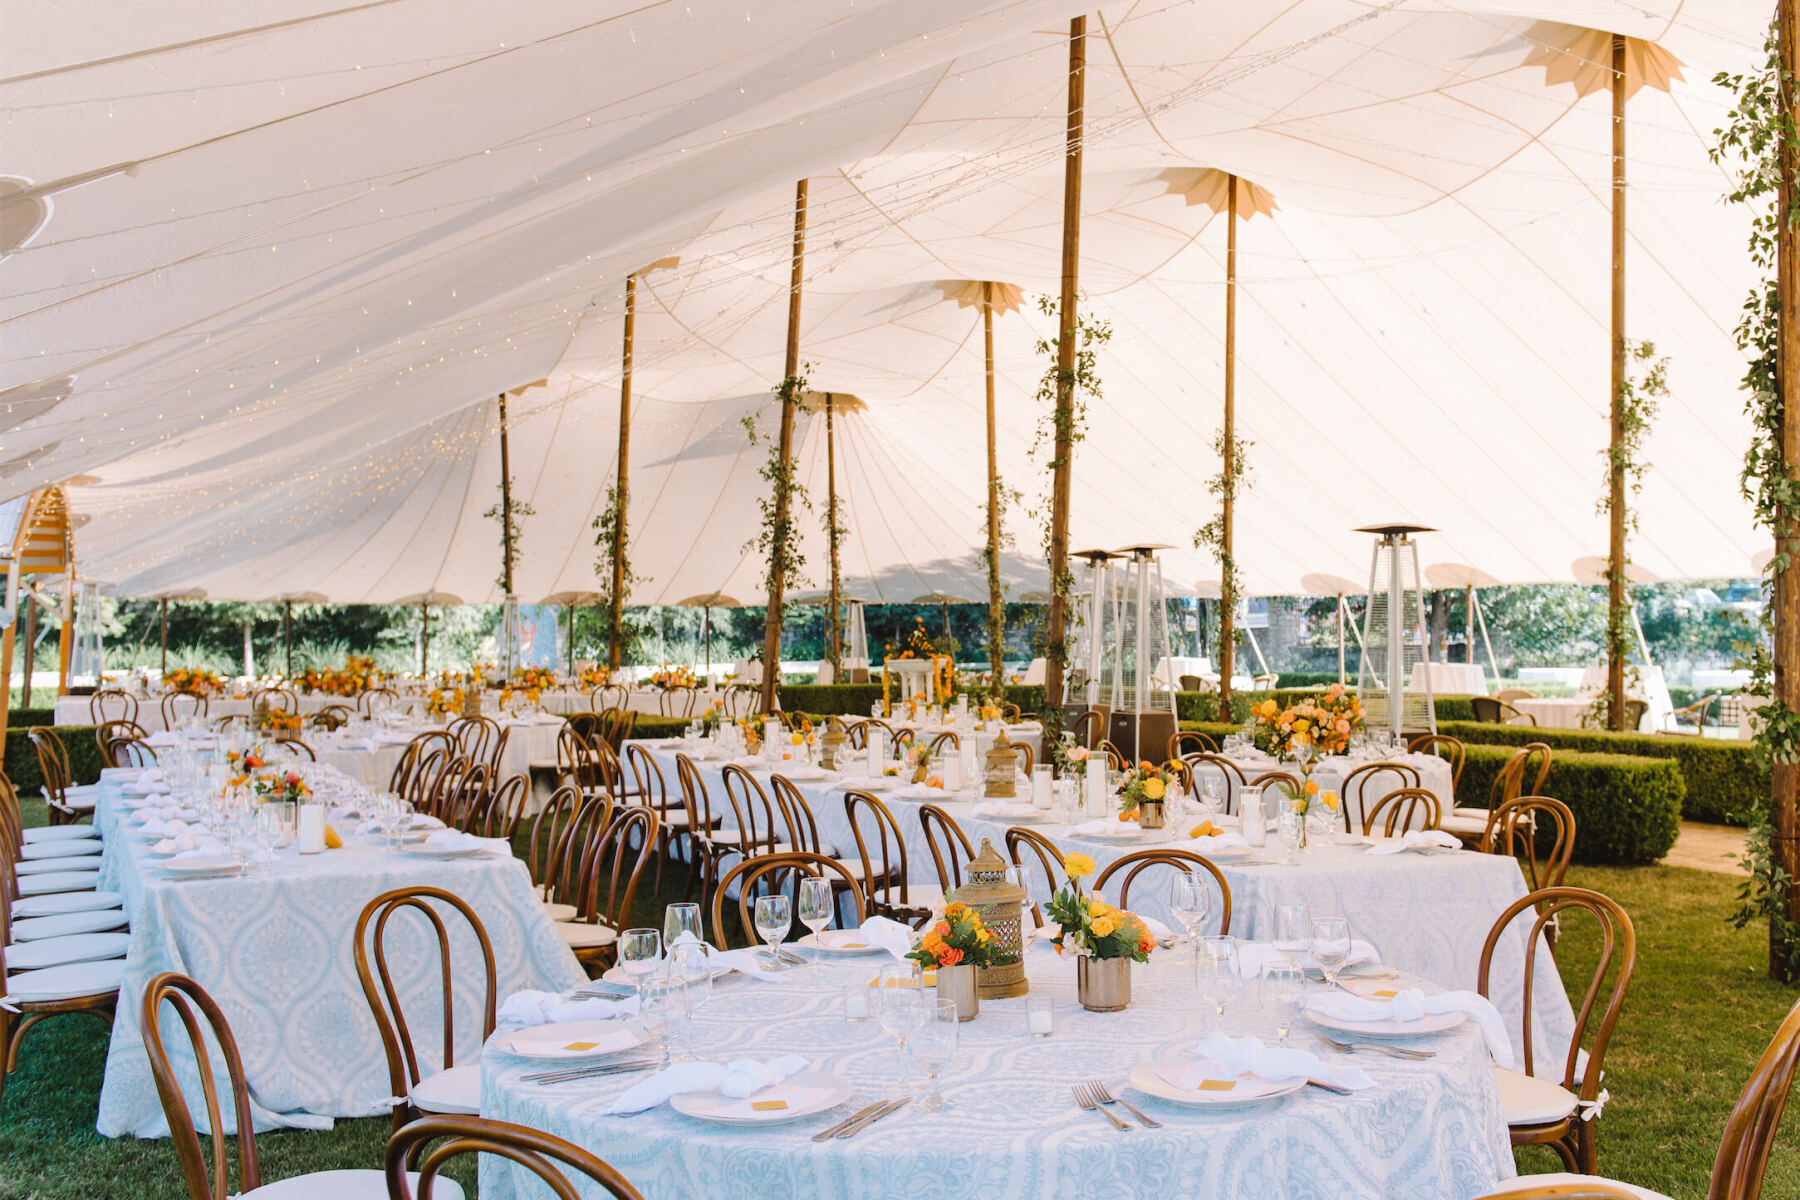 A tented reception at an Indian fusion wedding featured blue-and-white table linens, citrus-hued centerpieces, and poles wrapped with greenery.